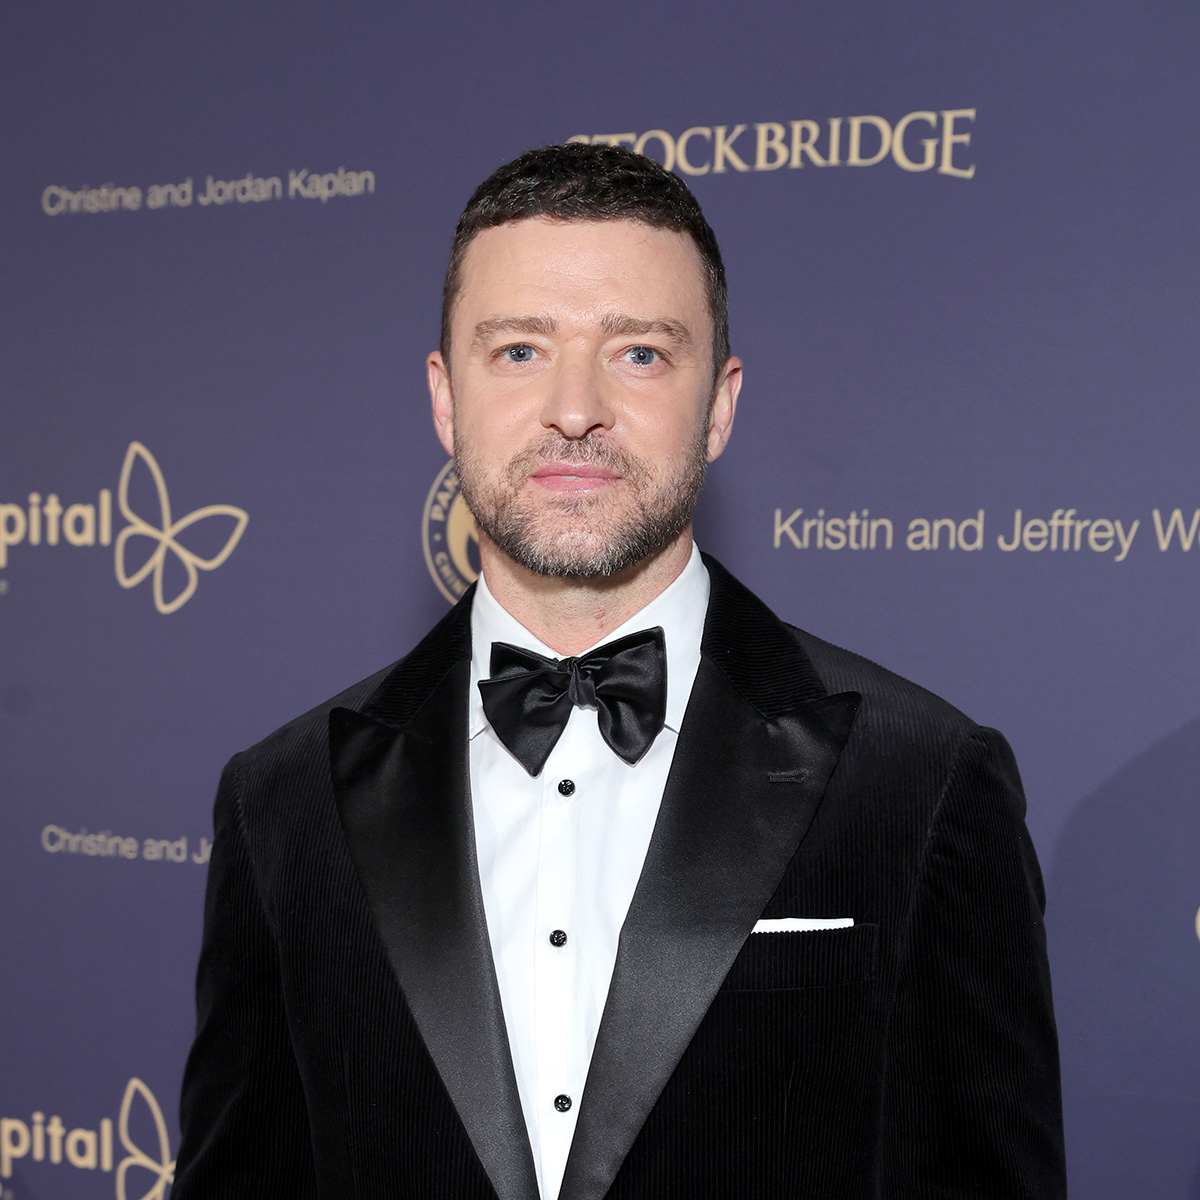 Justin Timberlake Released From Custody After DWI Arrest